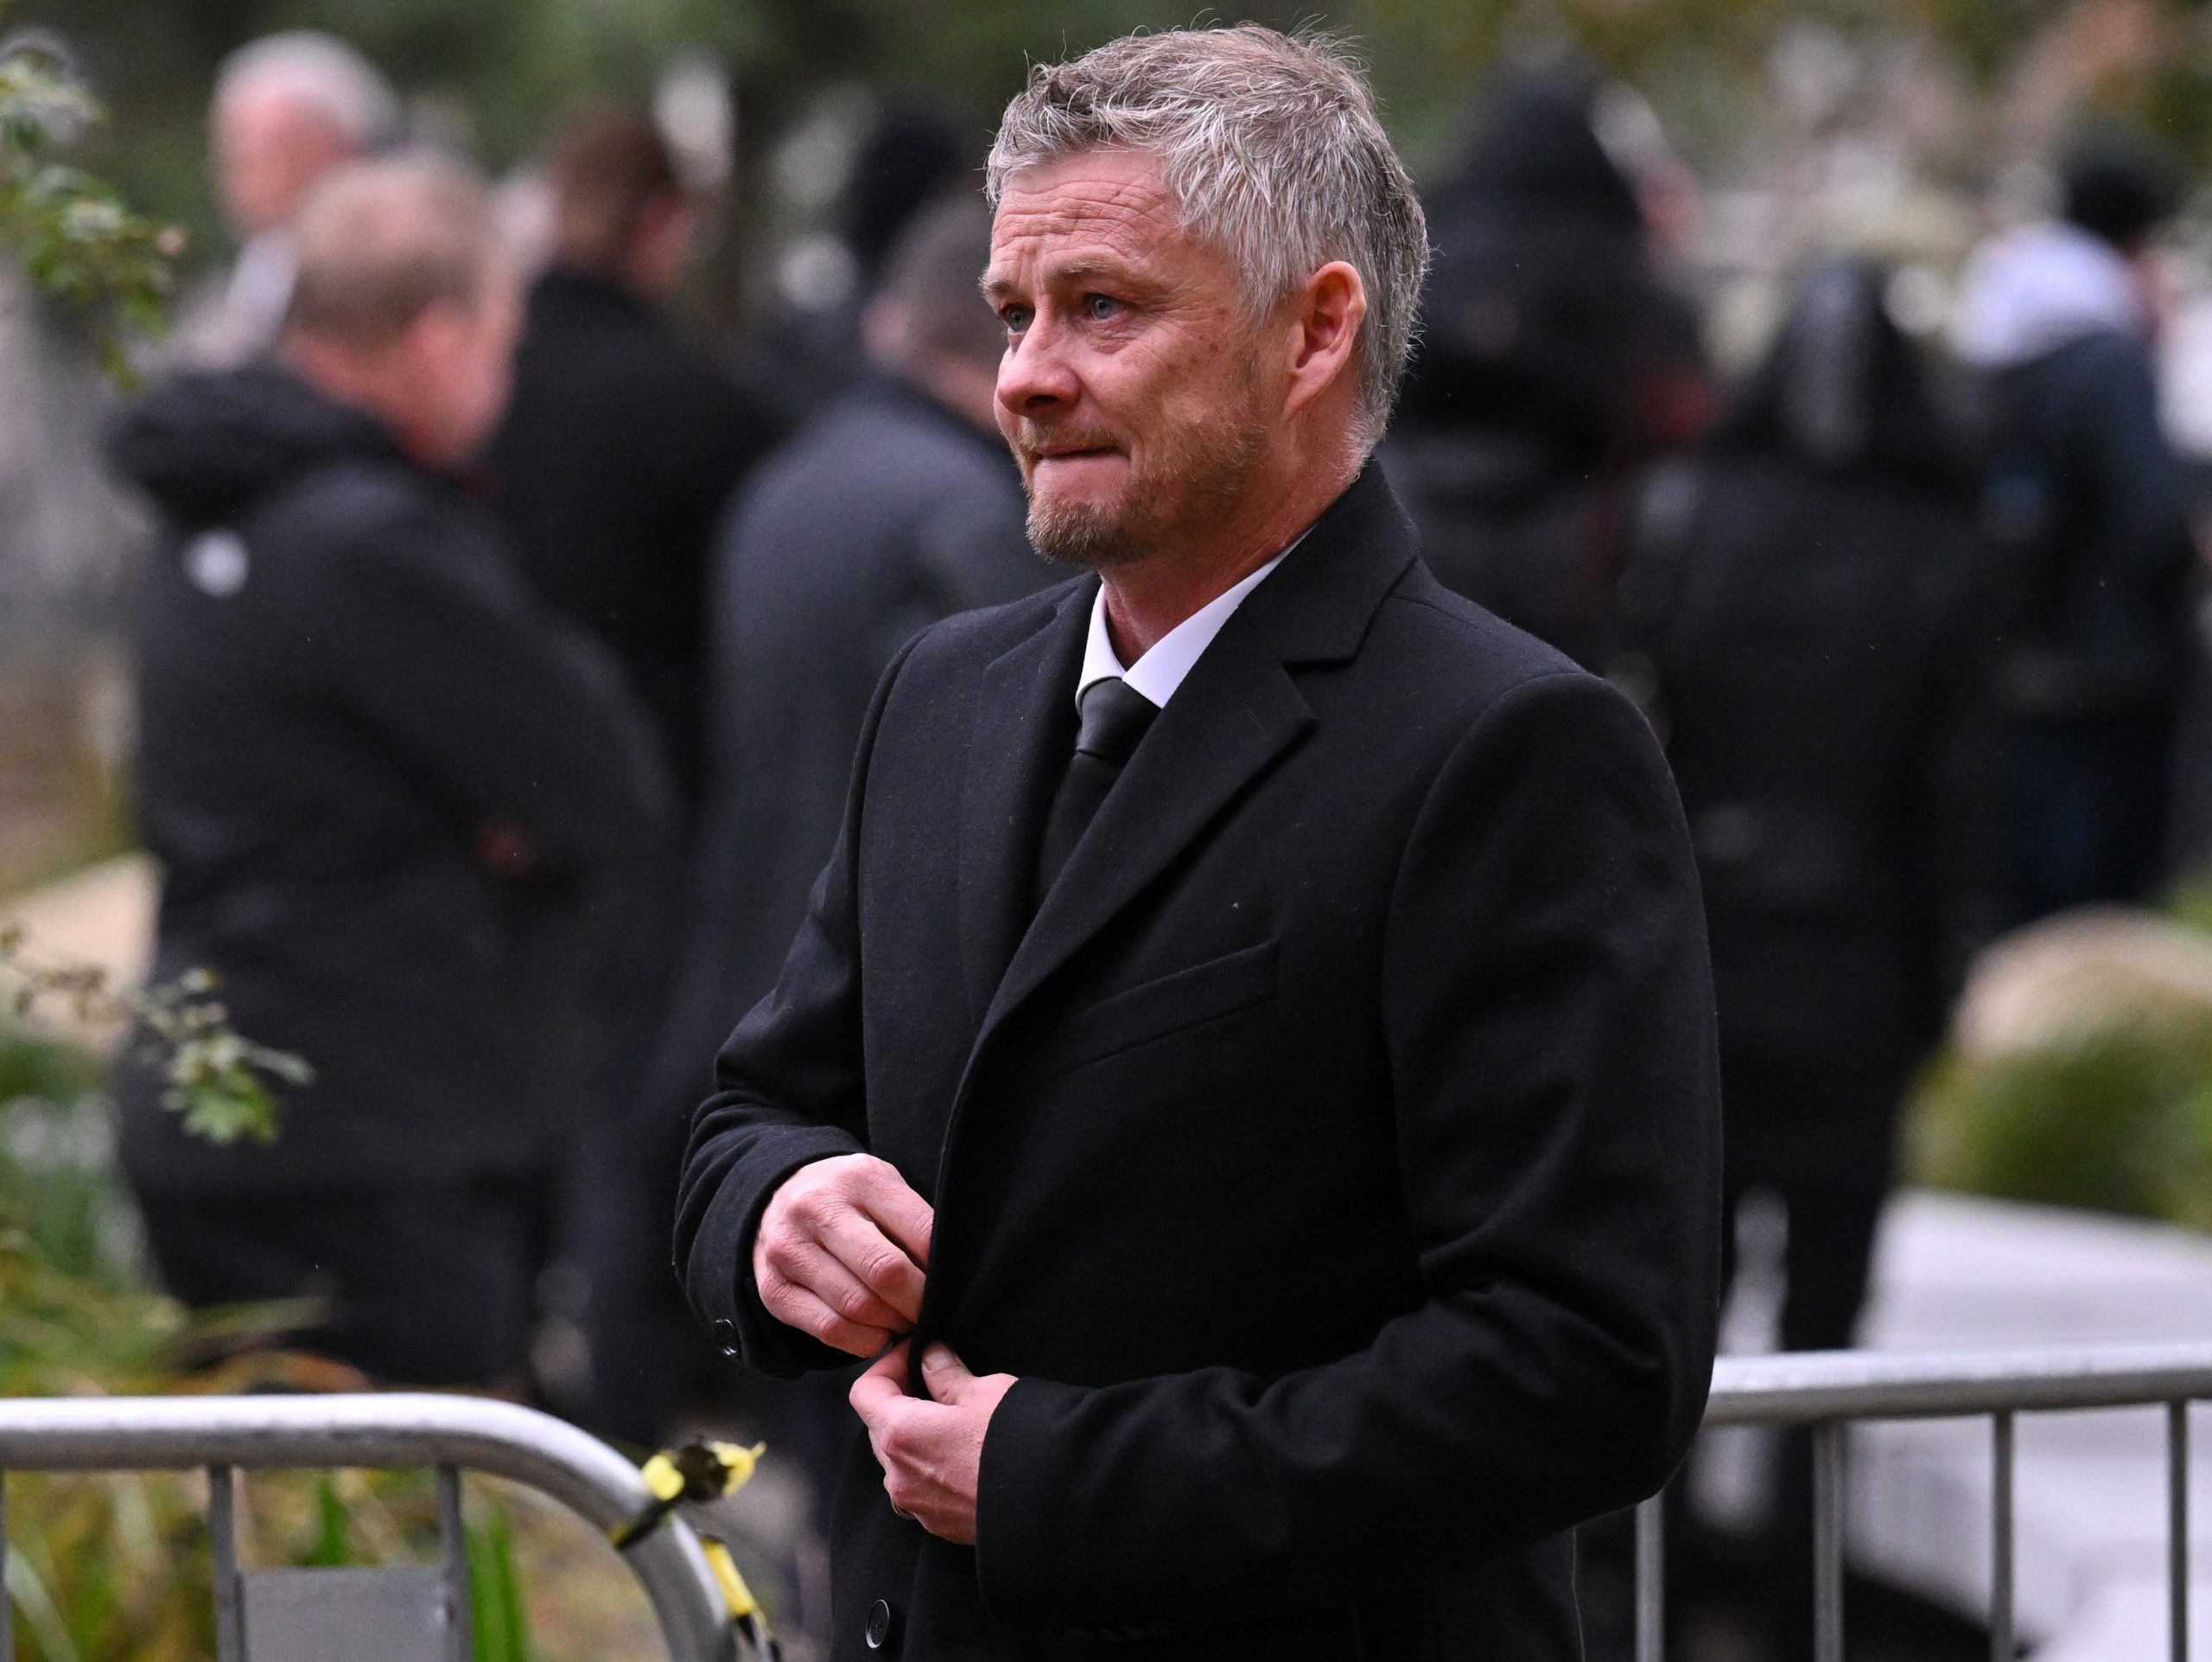 Ole Gunnar Solskjær reveals things changed when he got the Man United job on a permanent basis